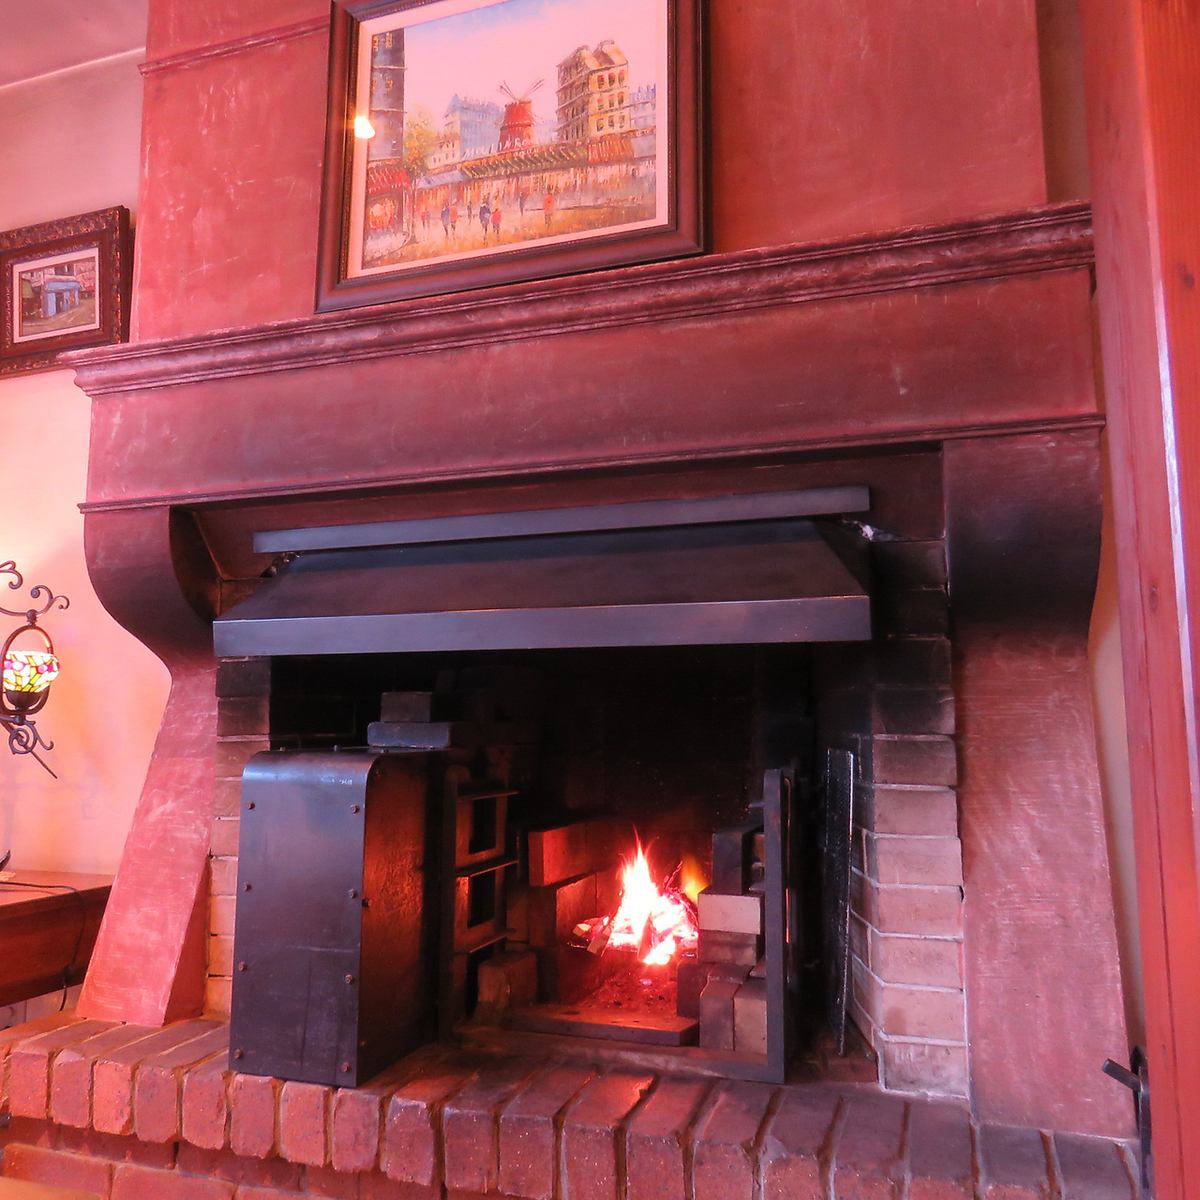 Inside the luxurious restaurant, a French restaurant with a nice aroma of grilling ingredients in the fireplace.